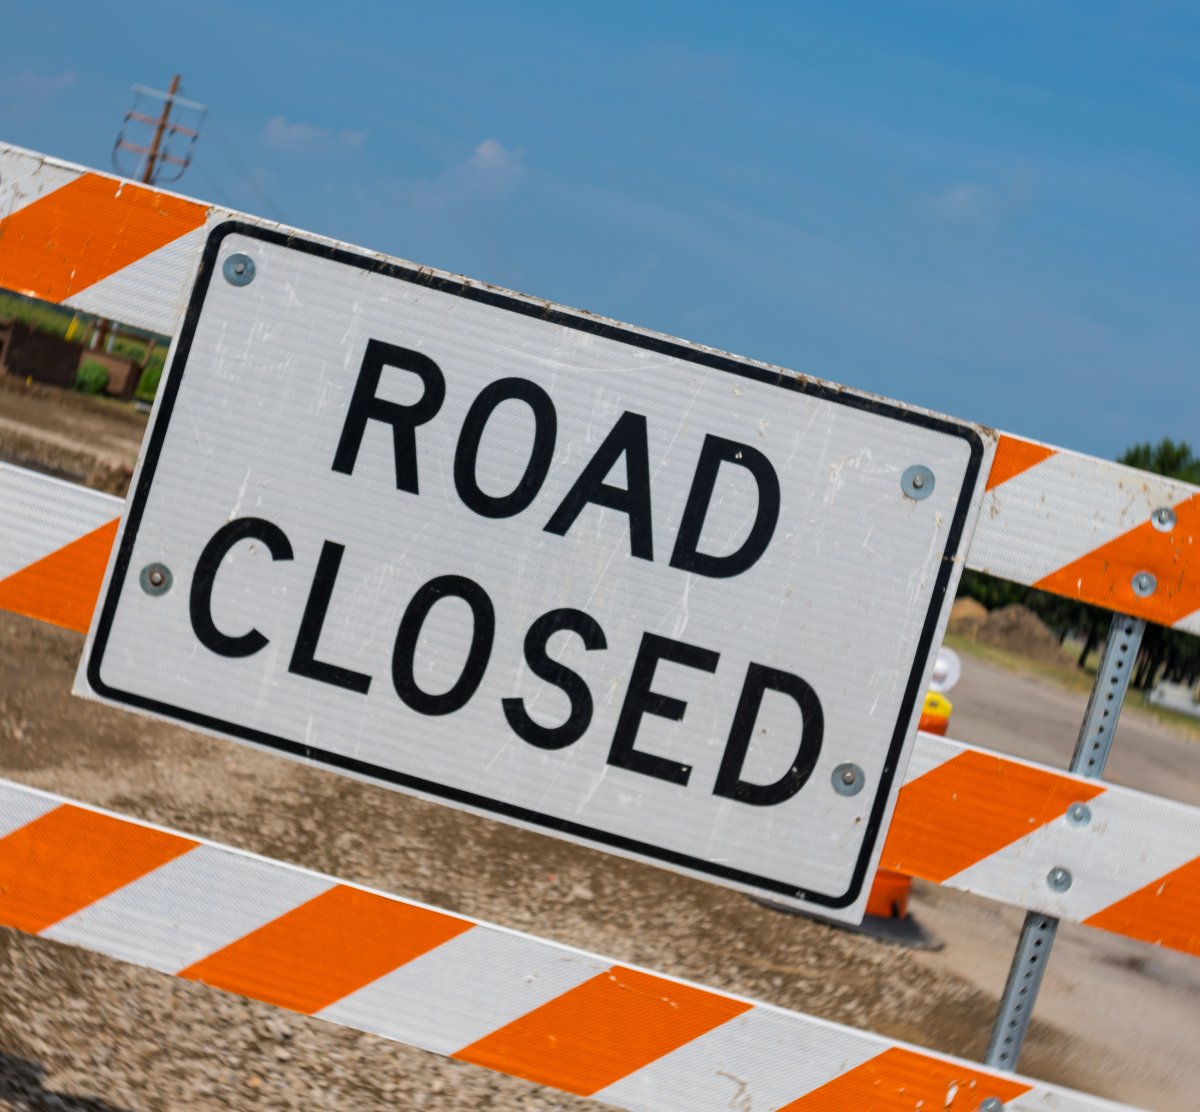 Clarke Road will be closed between Parkhurst Avenue and Dundas Street from Friday, May 3 at 7 p.m. to Monday, May 6 at 7 a.m.